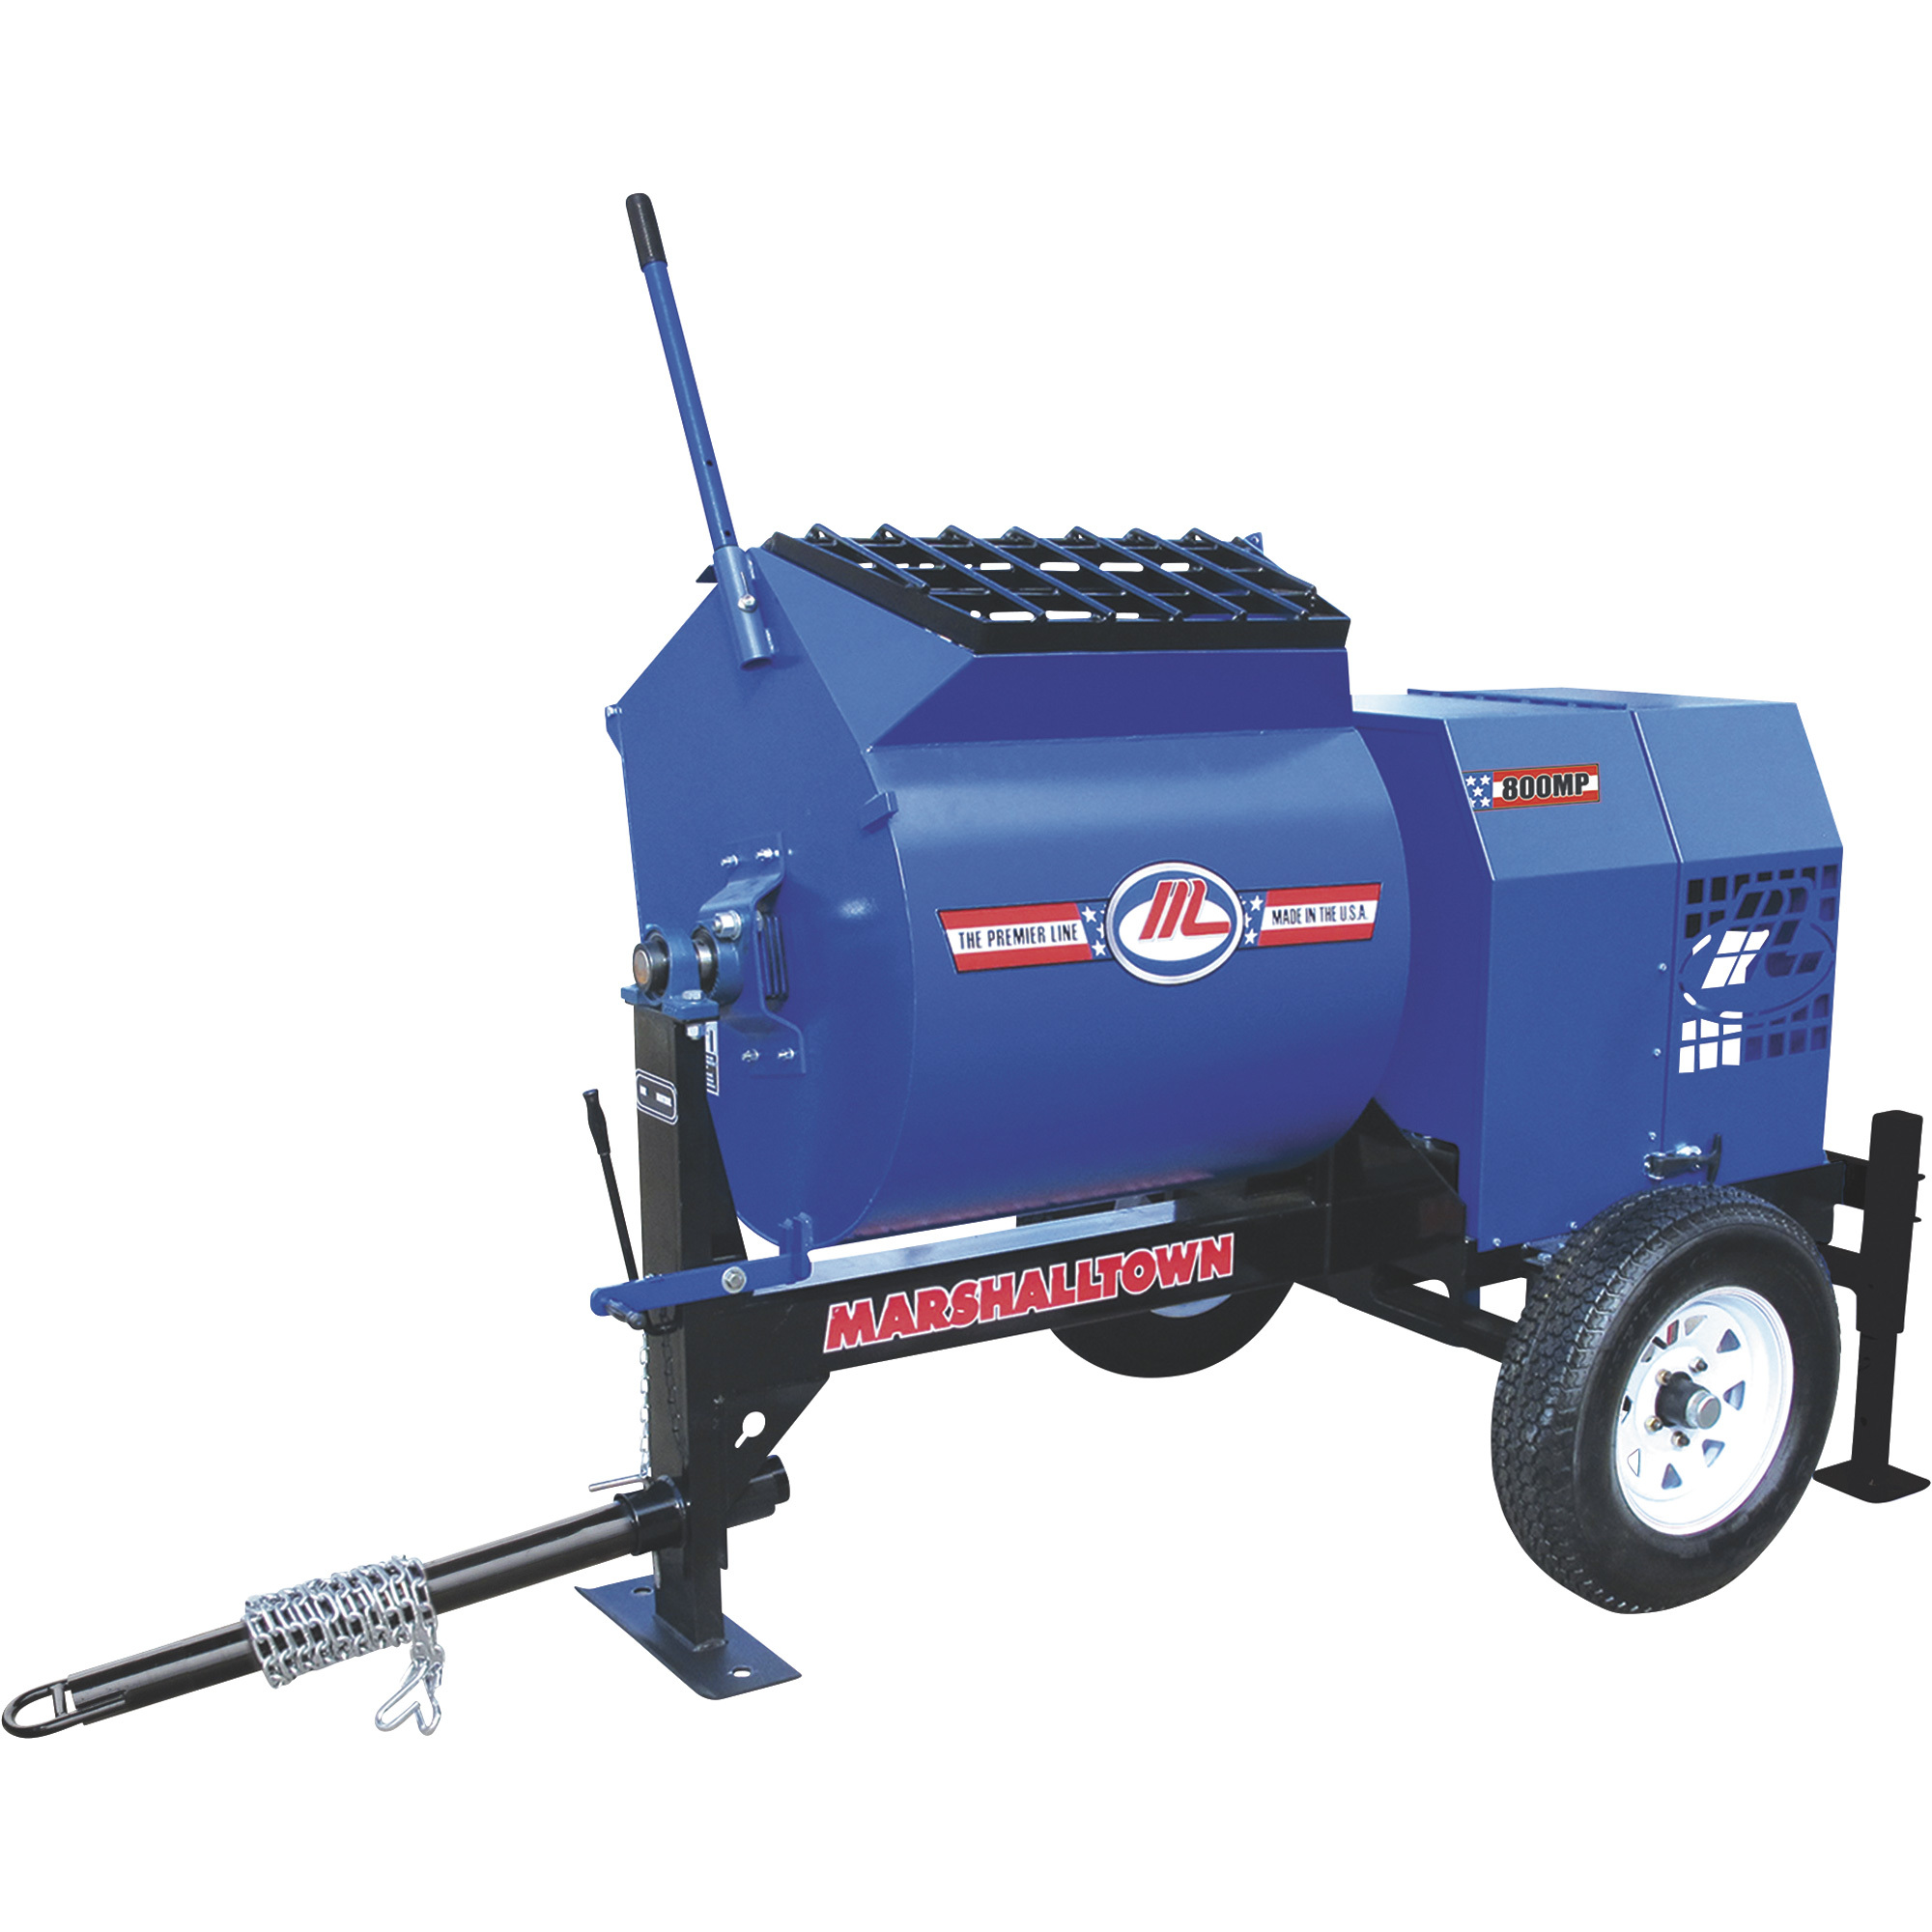 Marshalltown 800MP Mortar/Plaster Mixer with Pintle Tow Outrigger and 3 HP Electric Engine â Model 800MP3EPO